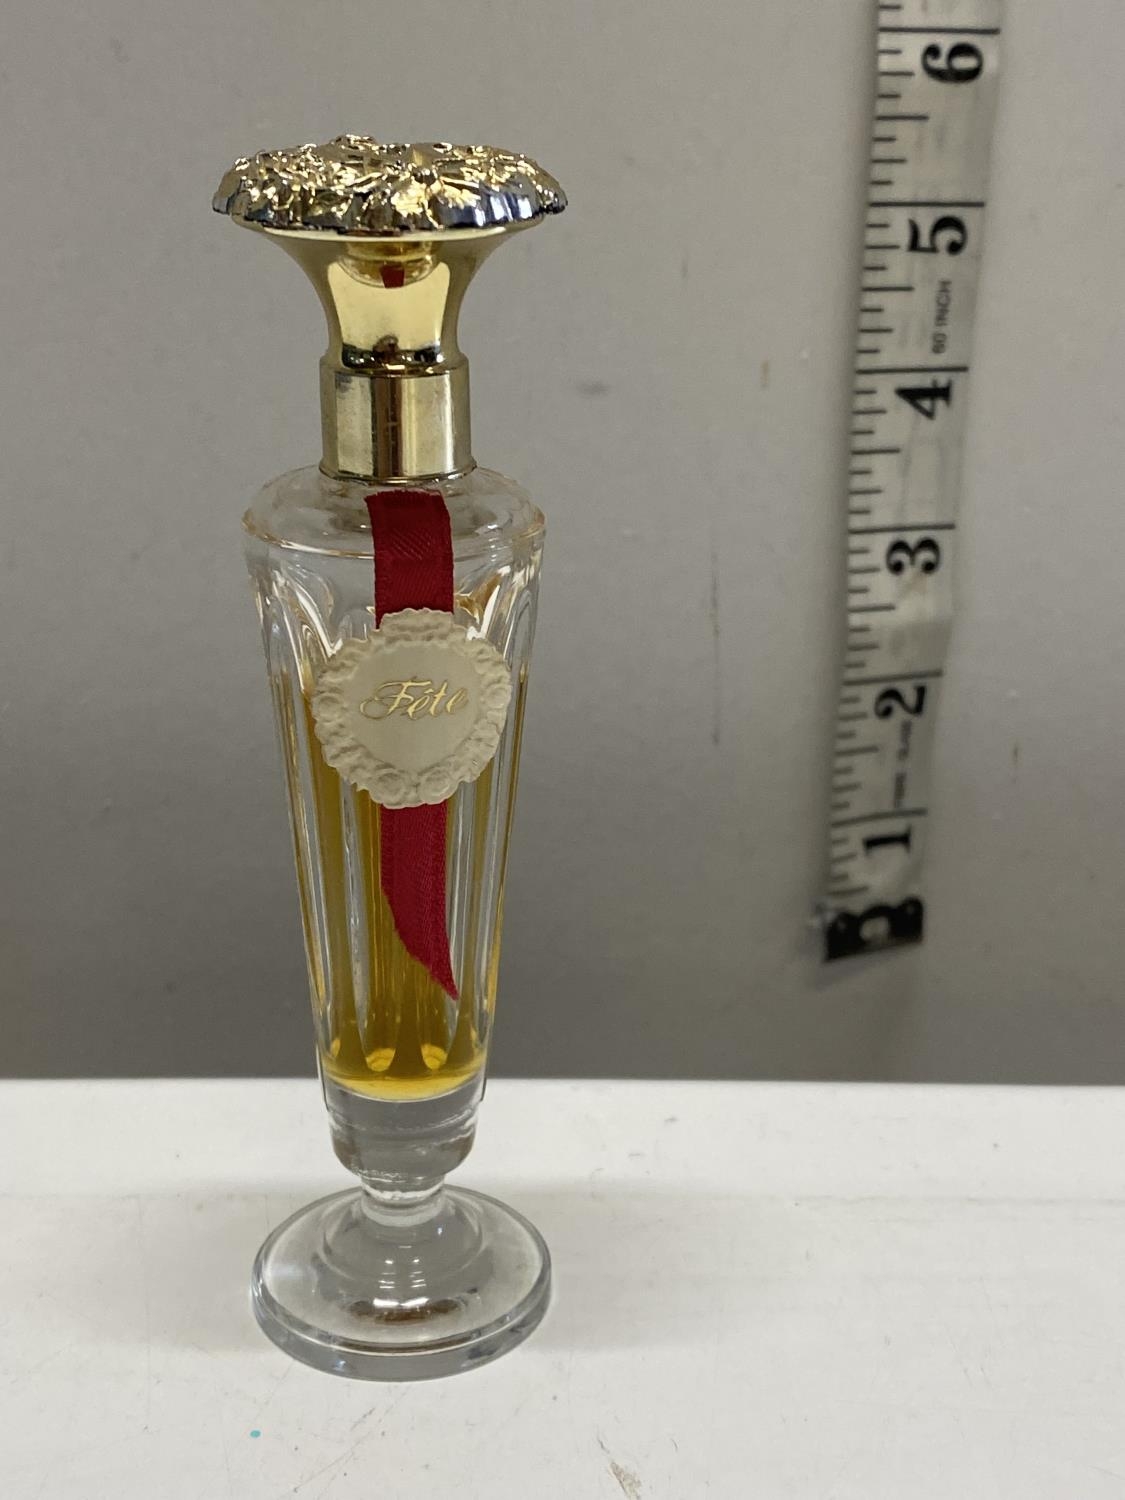 A bottle of Fete perfume (slightly used)